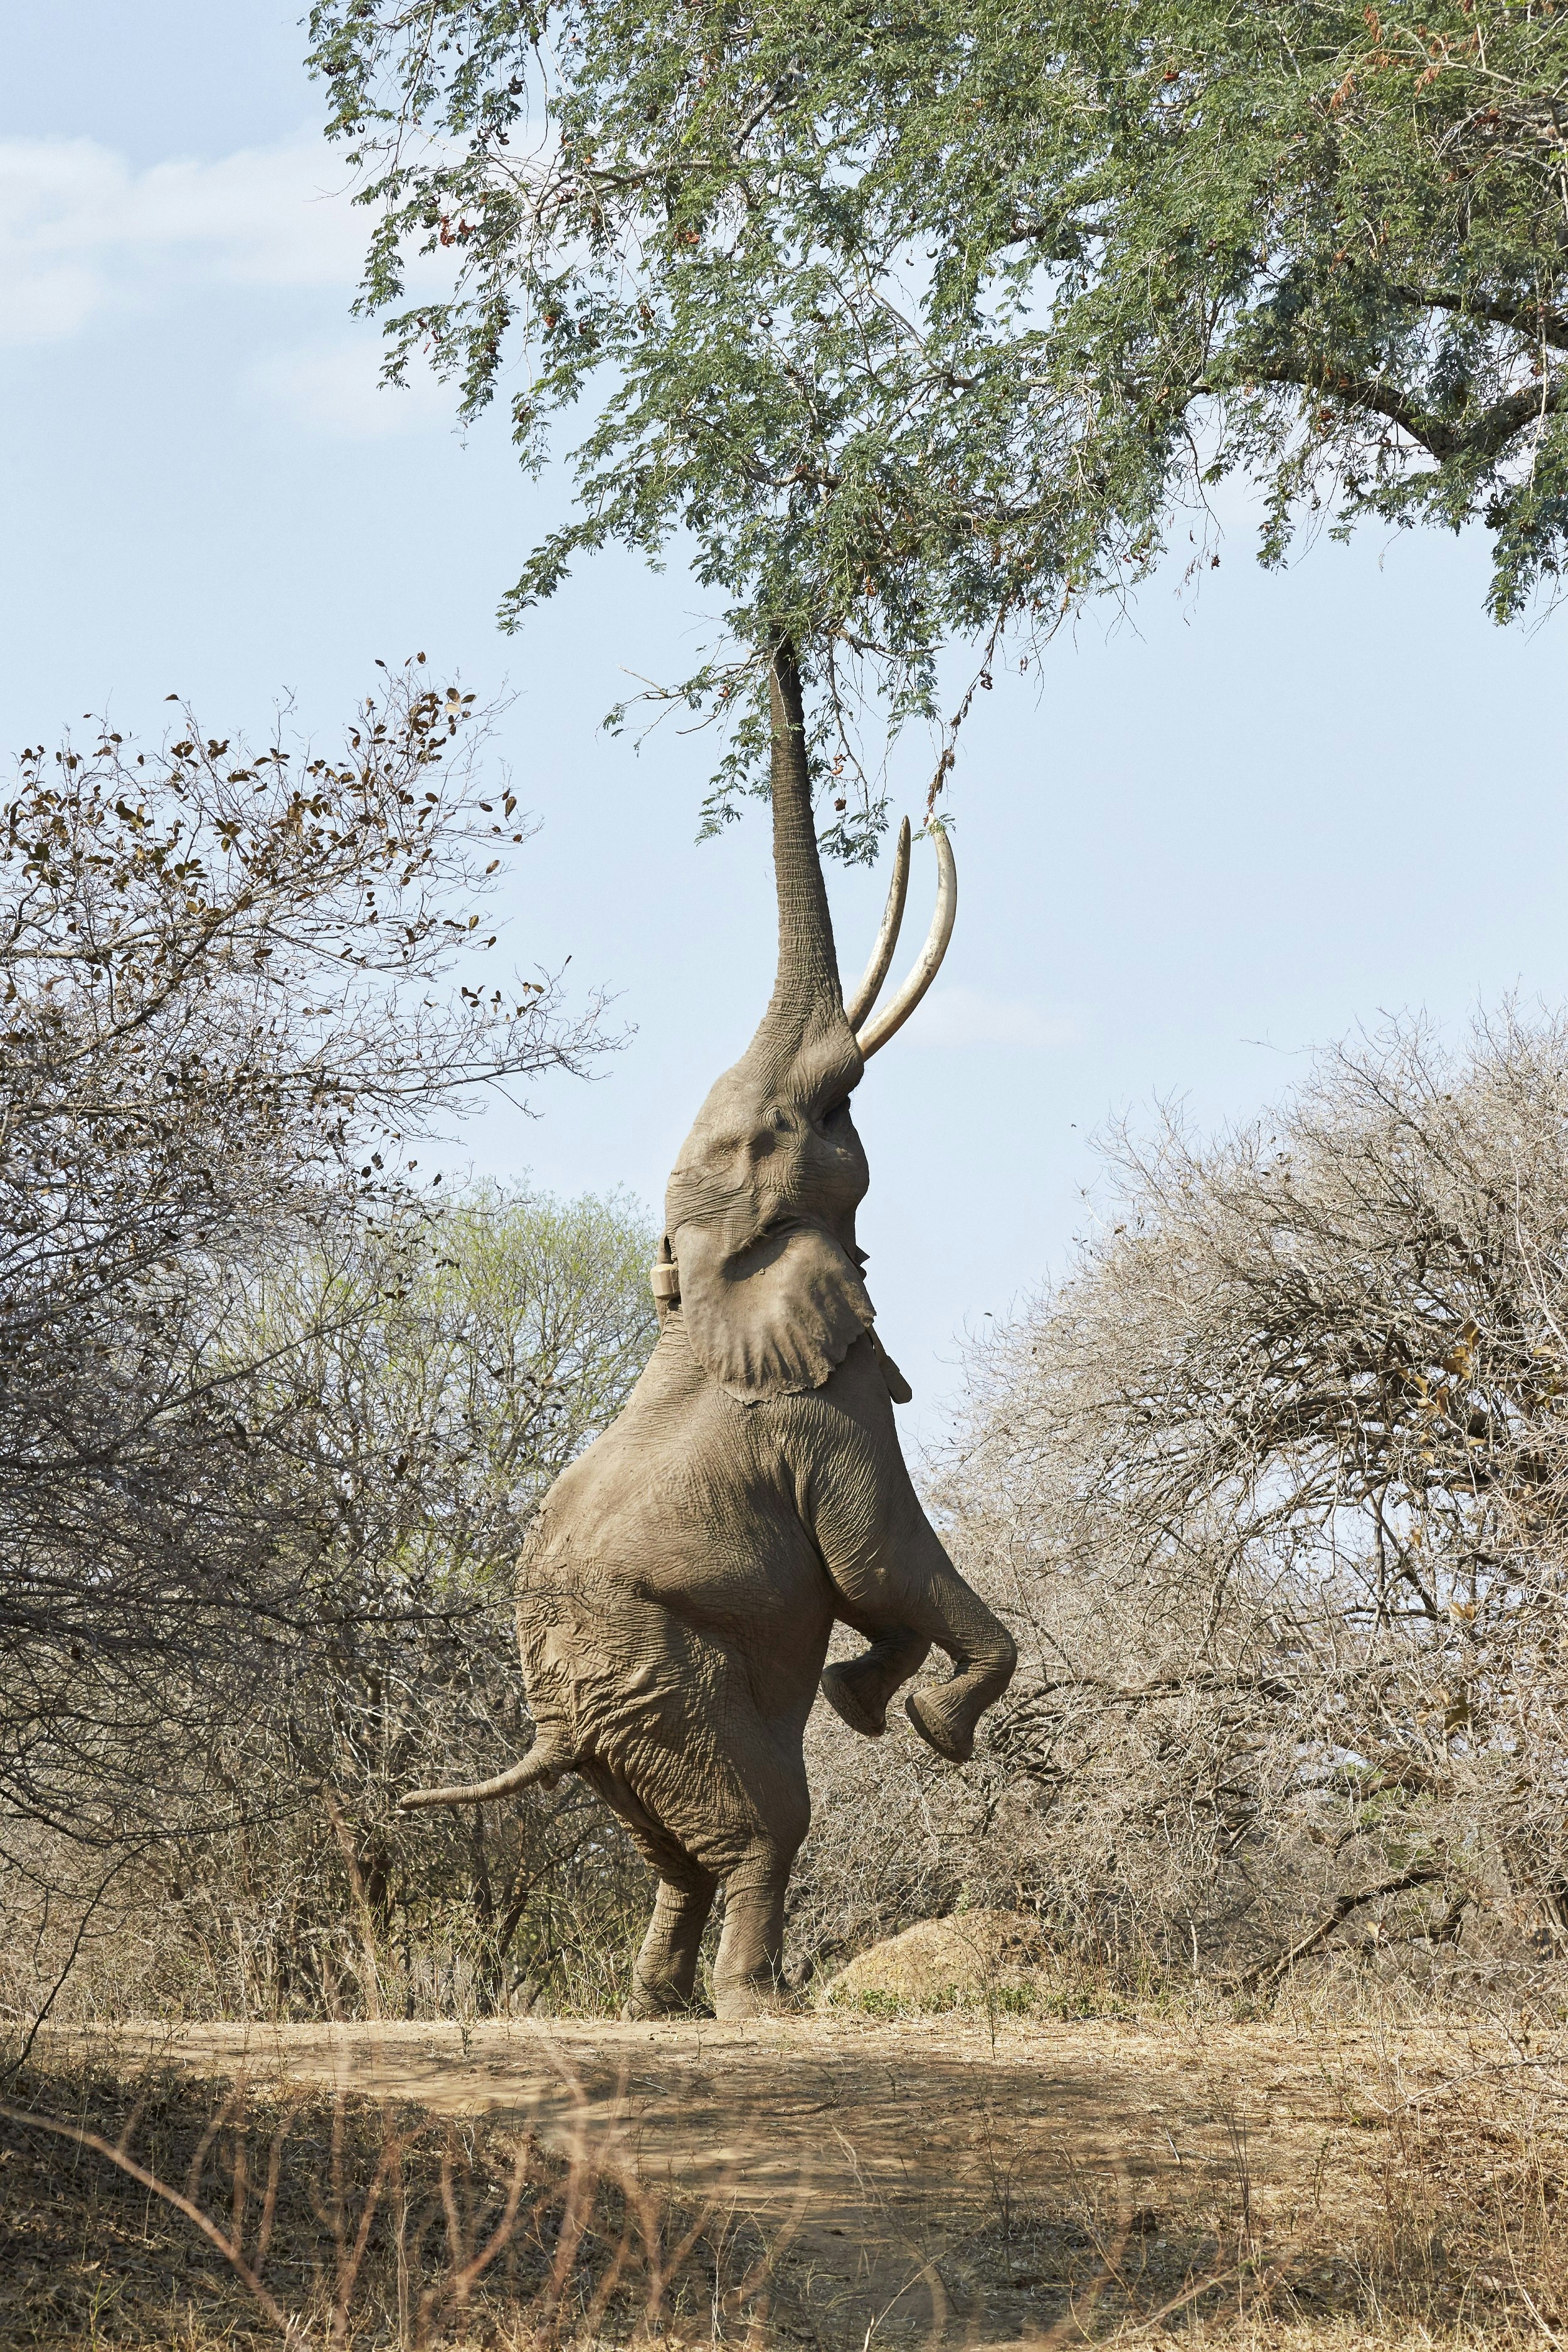 An elephant standing up on its hind legs, with its trunk outstretched to pull down a tree branch for food.